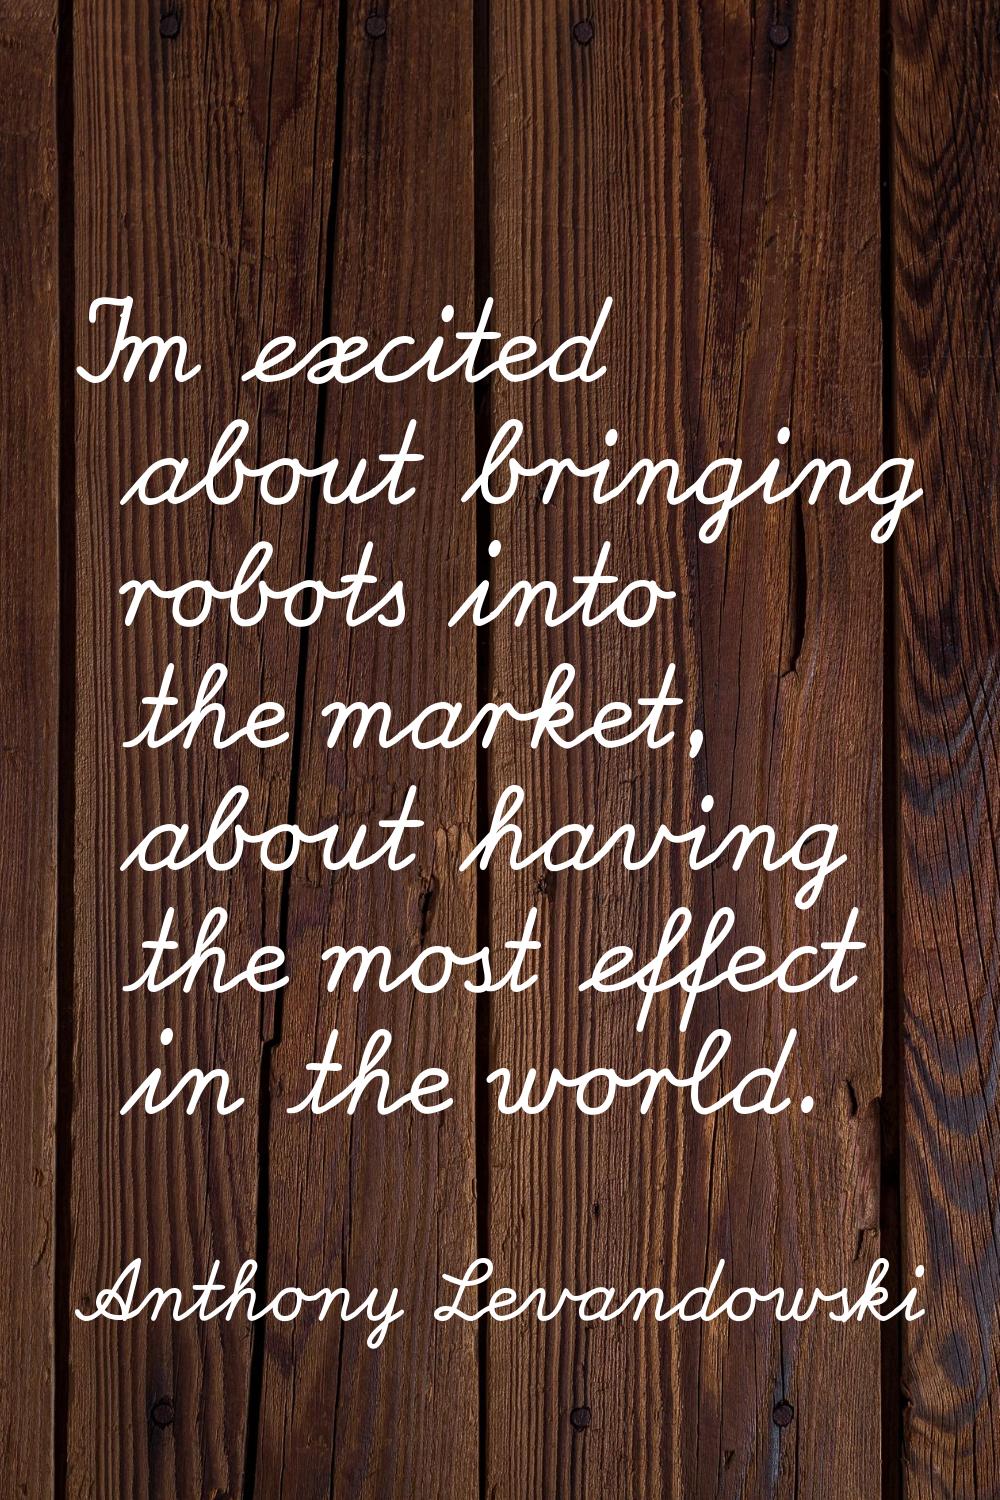 I'm excited about bringing robots into the market, about having the most effect in the world.